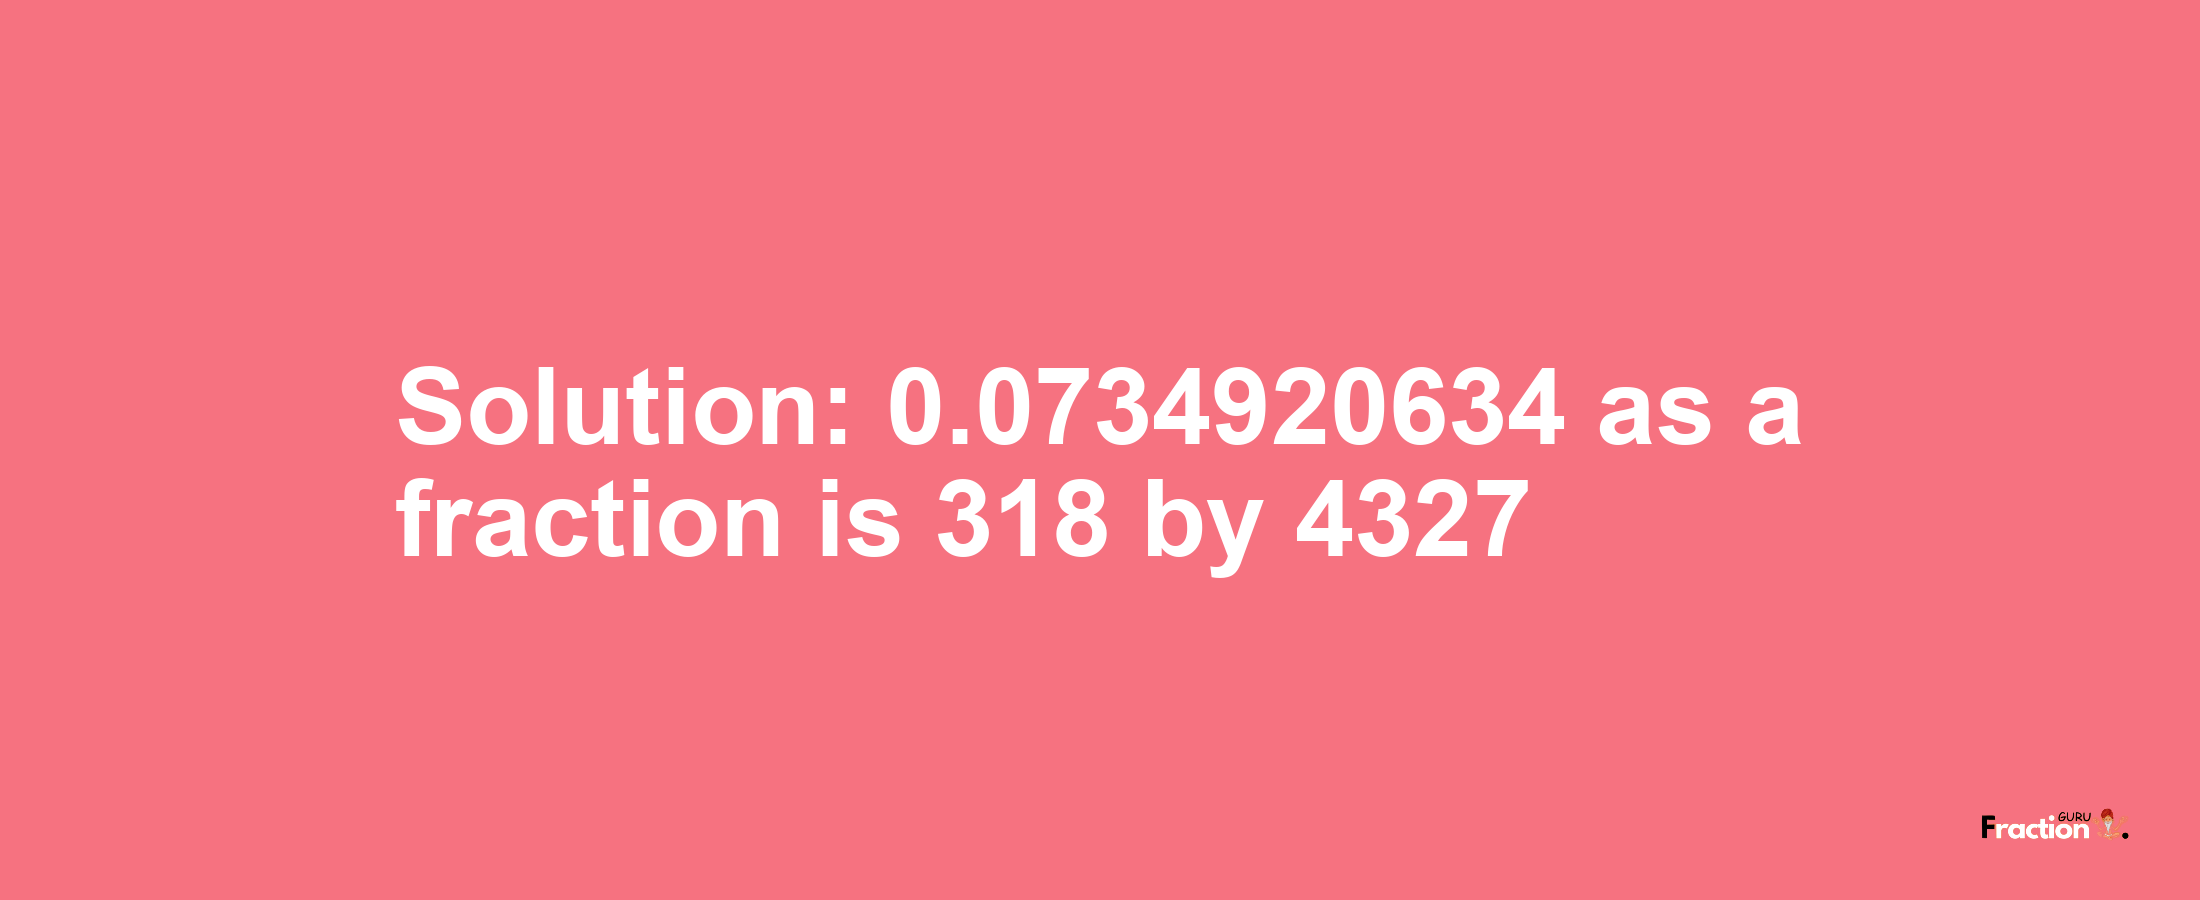 Solution:0.0734920634 as a fraction is 318/4327